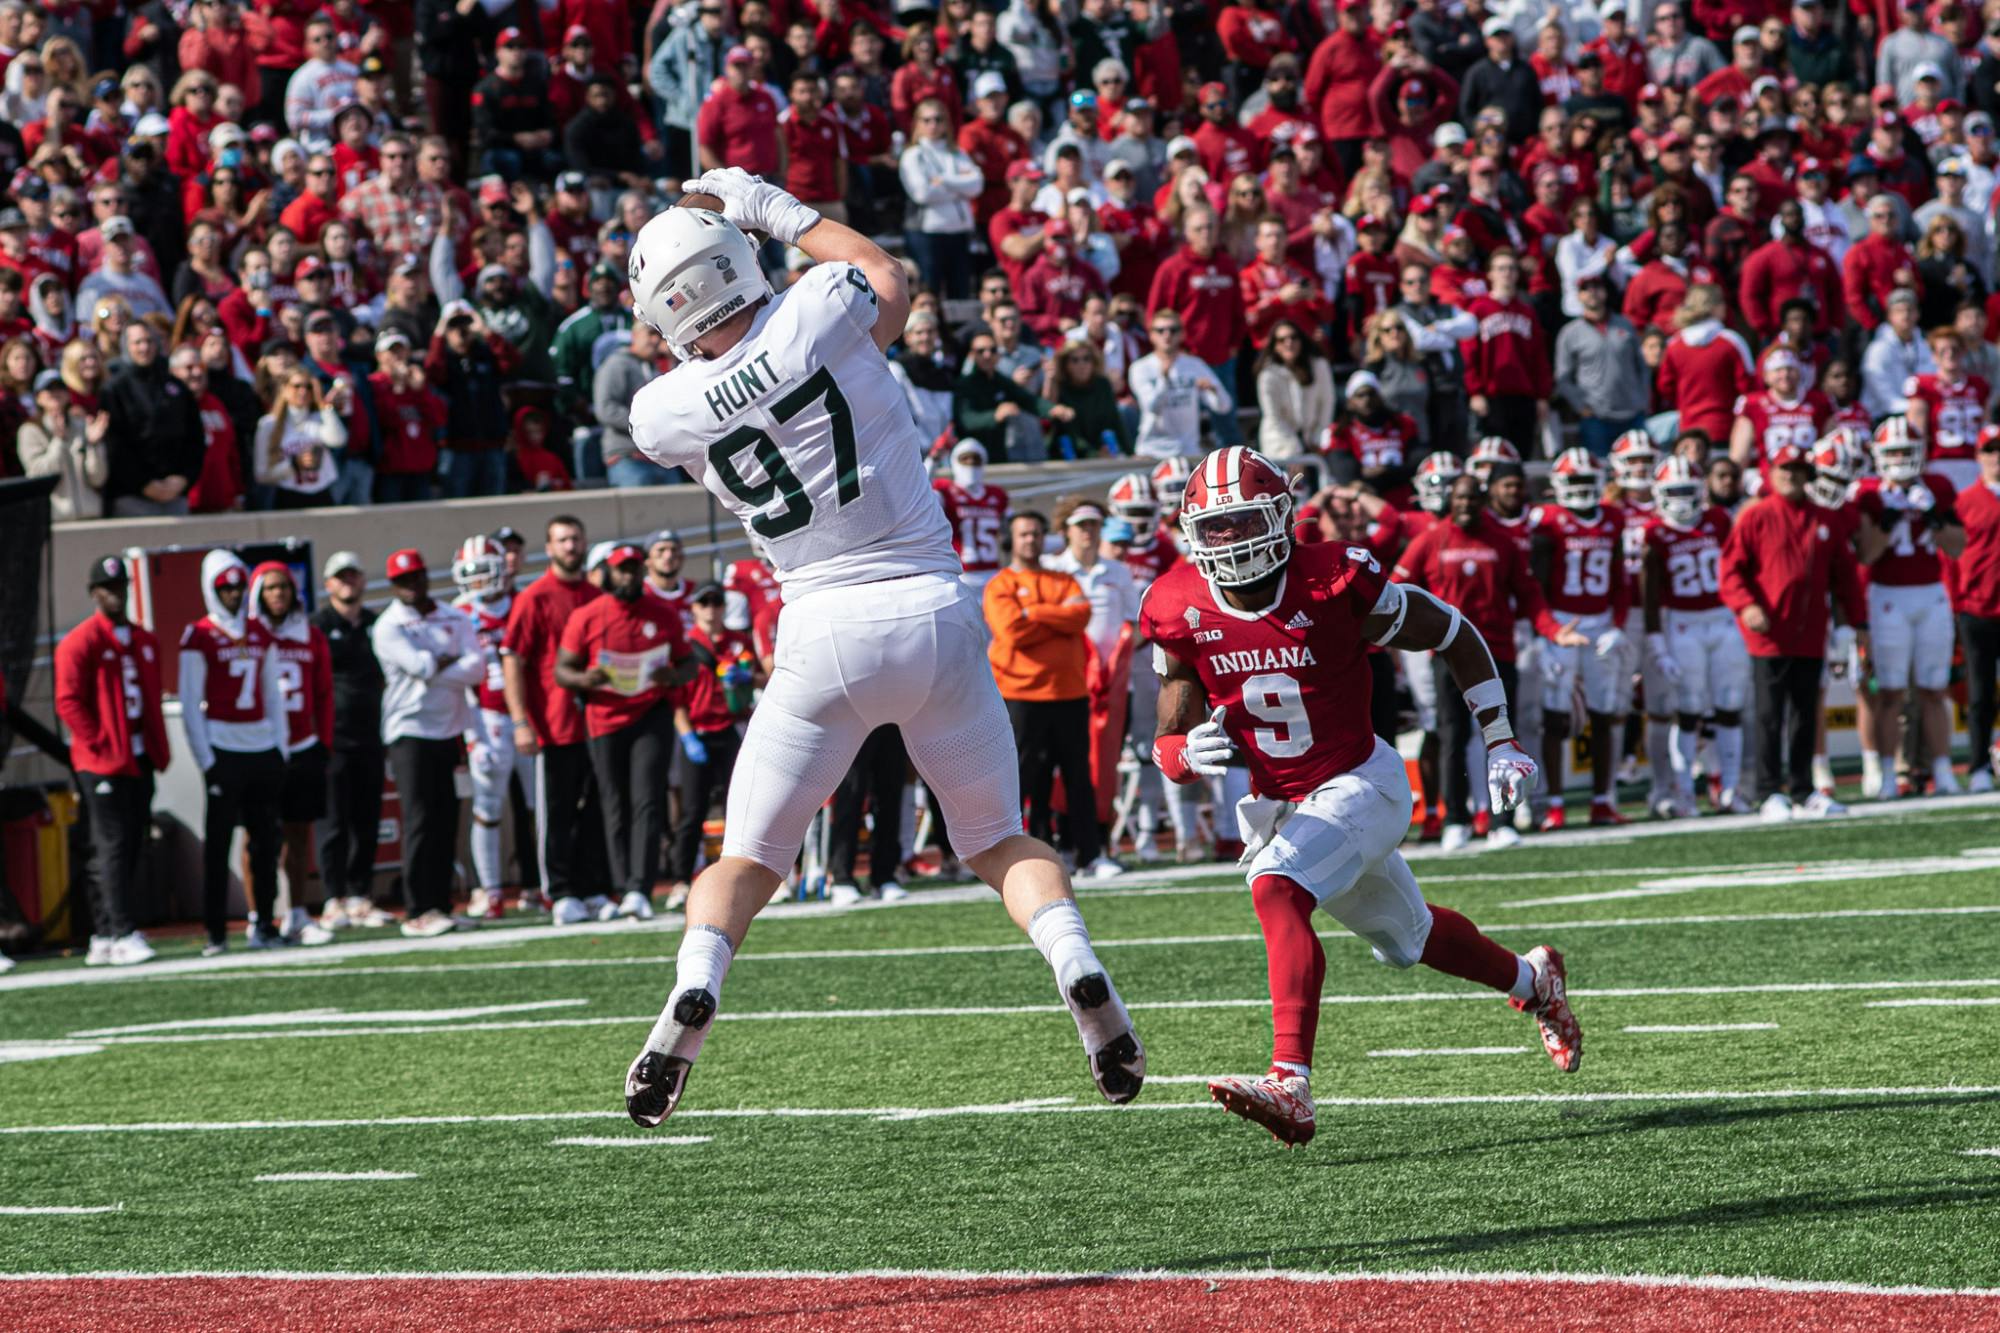 <p>Redshirt senior tight end Tyler Hunt catches a throw from redshirt sophomore quarterback Payton Thorne, scoring the Spartans&#x27; lone offensive touchdown. The Spartans found a way to hold on against the Hoosiers with a 20-15 win, scraping to their first 7-0 start since 2015 on Oct. 16, 2021.</p>